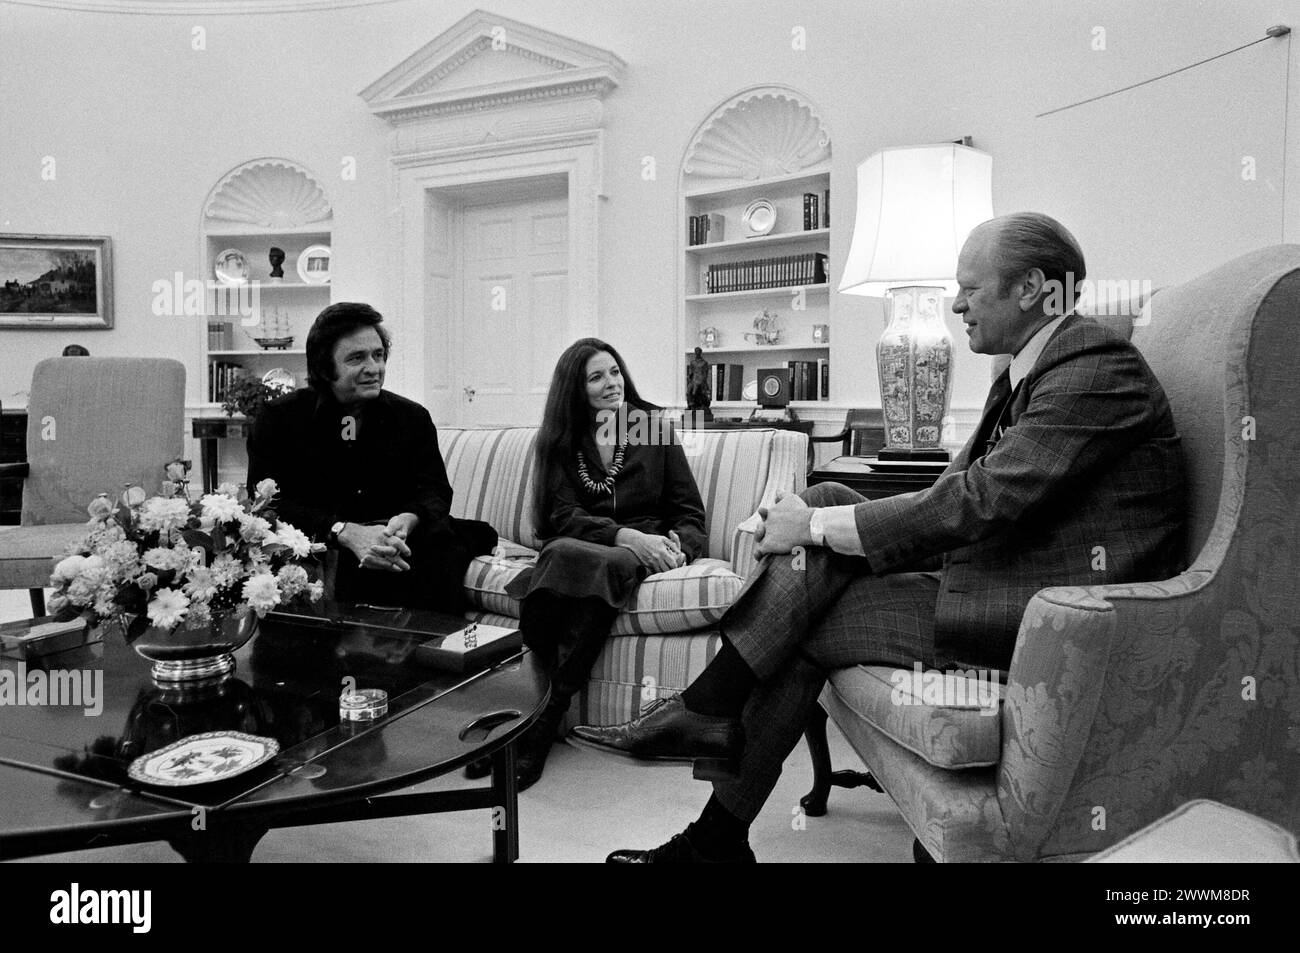 Country and Western Singers Johnny Cash and June Carter Cash Visit President Gerald R. Ford at the White House, 1975 - White House Office Photo Stock Photo